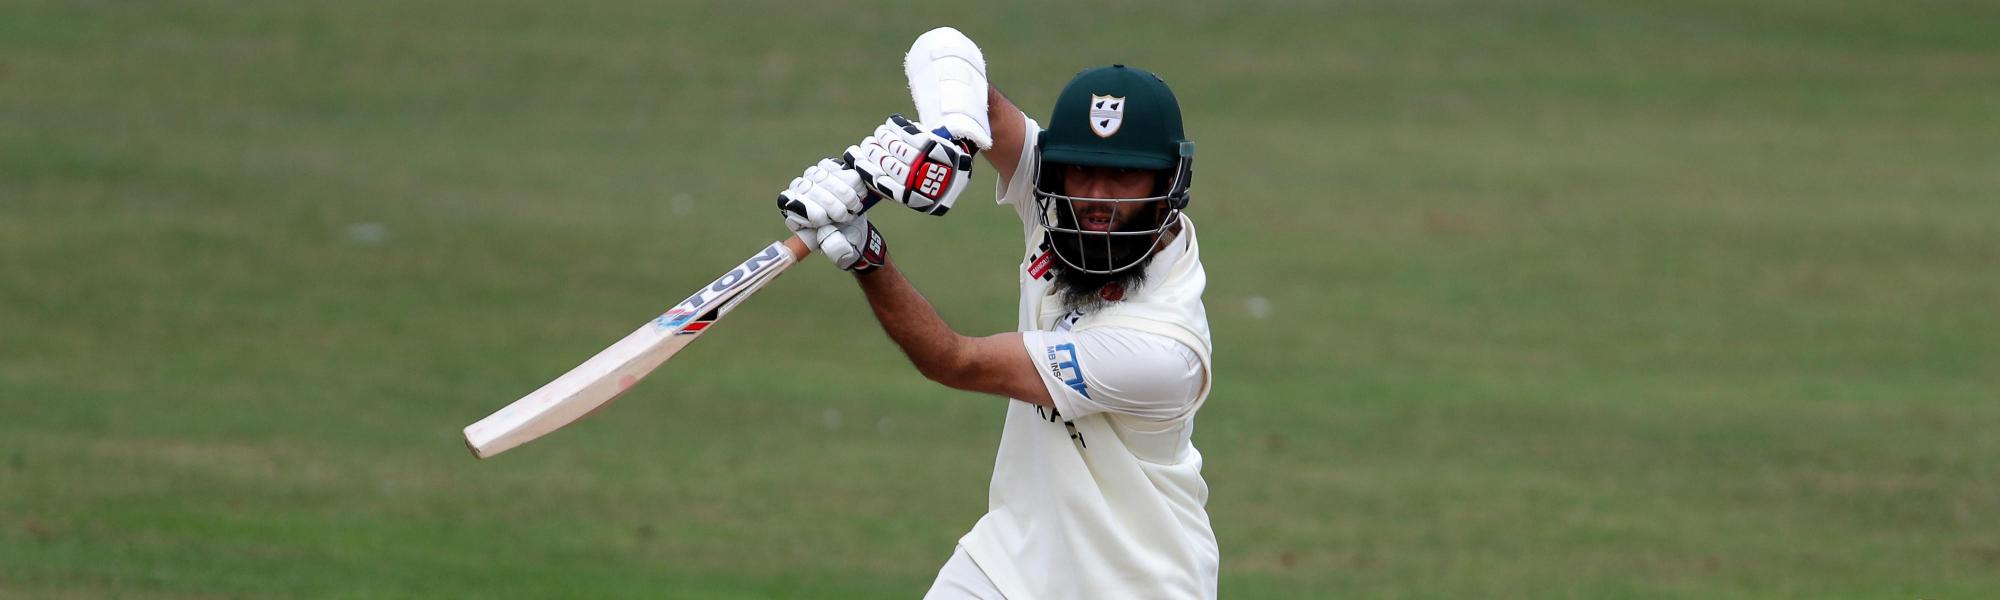 Moeen Ali eyes England recall after domestic double